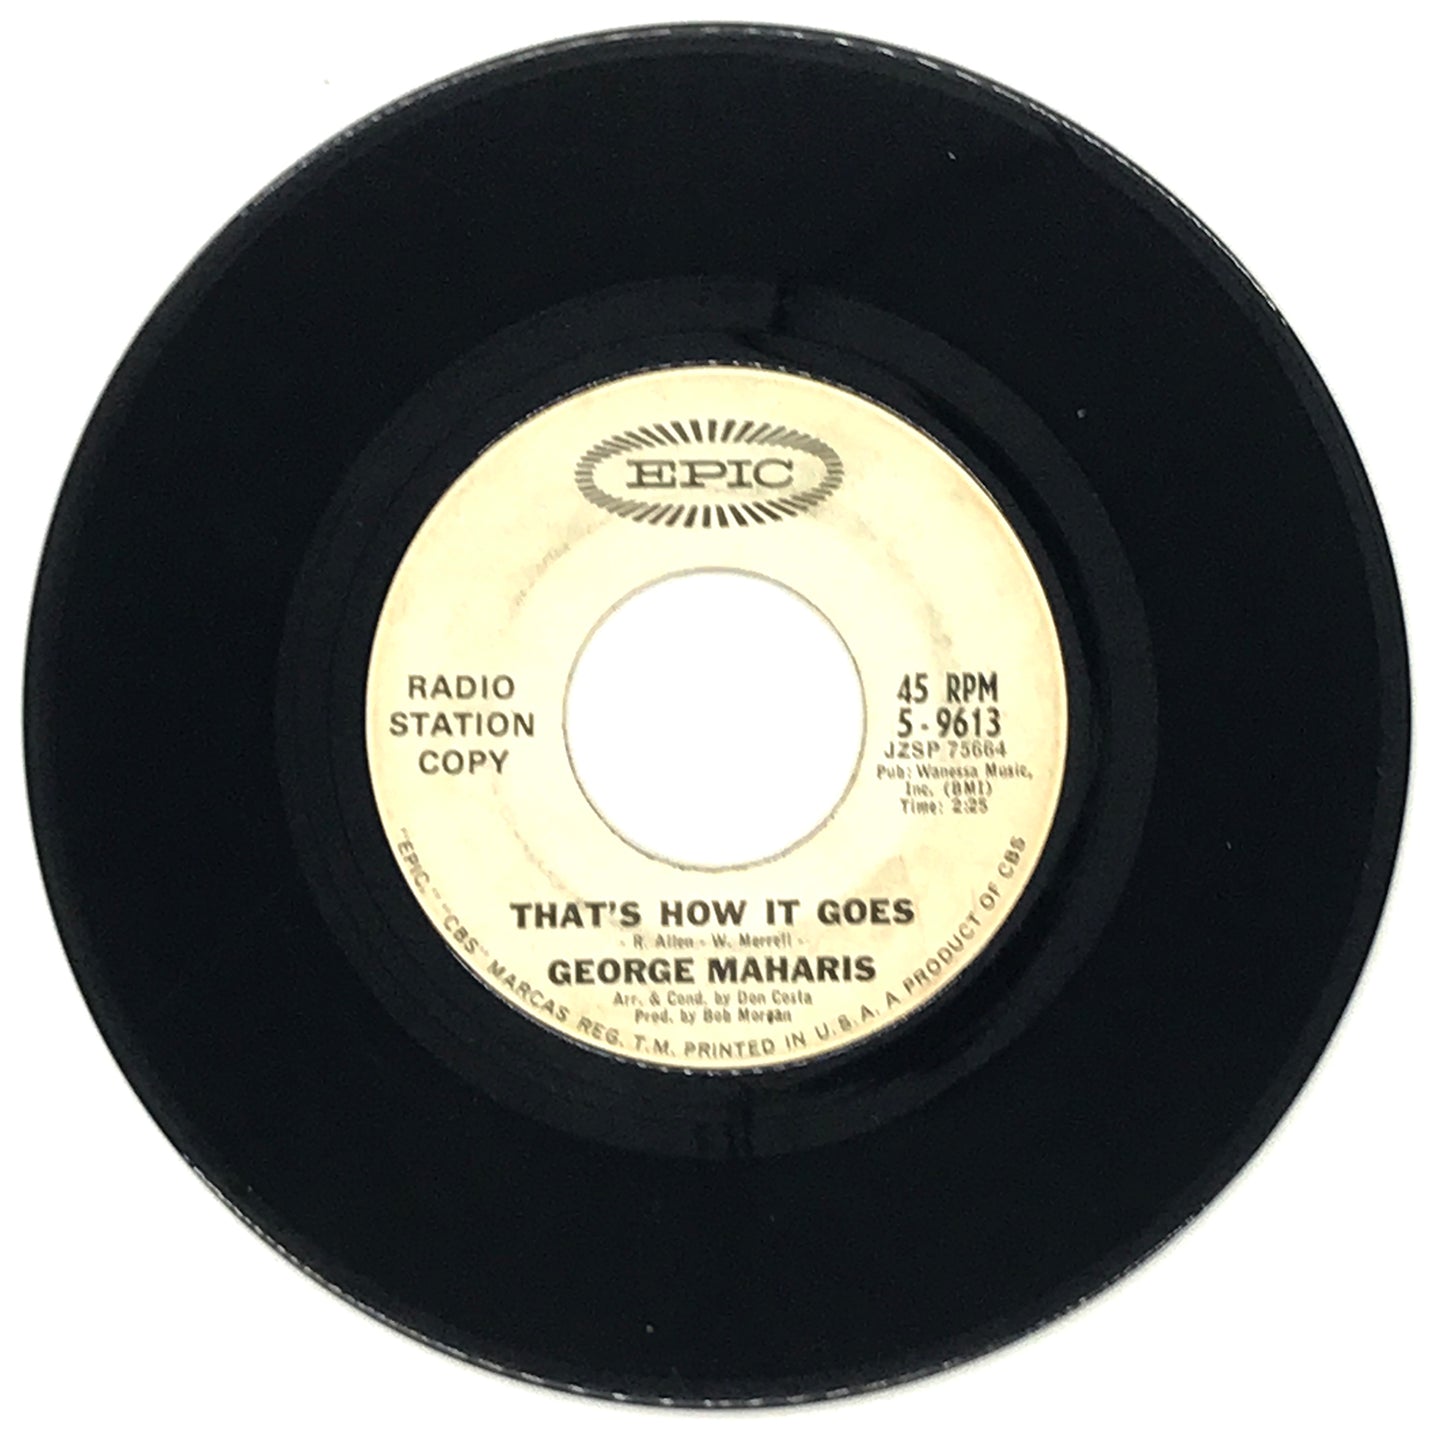 George Maharis : THAT'S HOW IT GOES/ IT ISN'T THERE